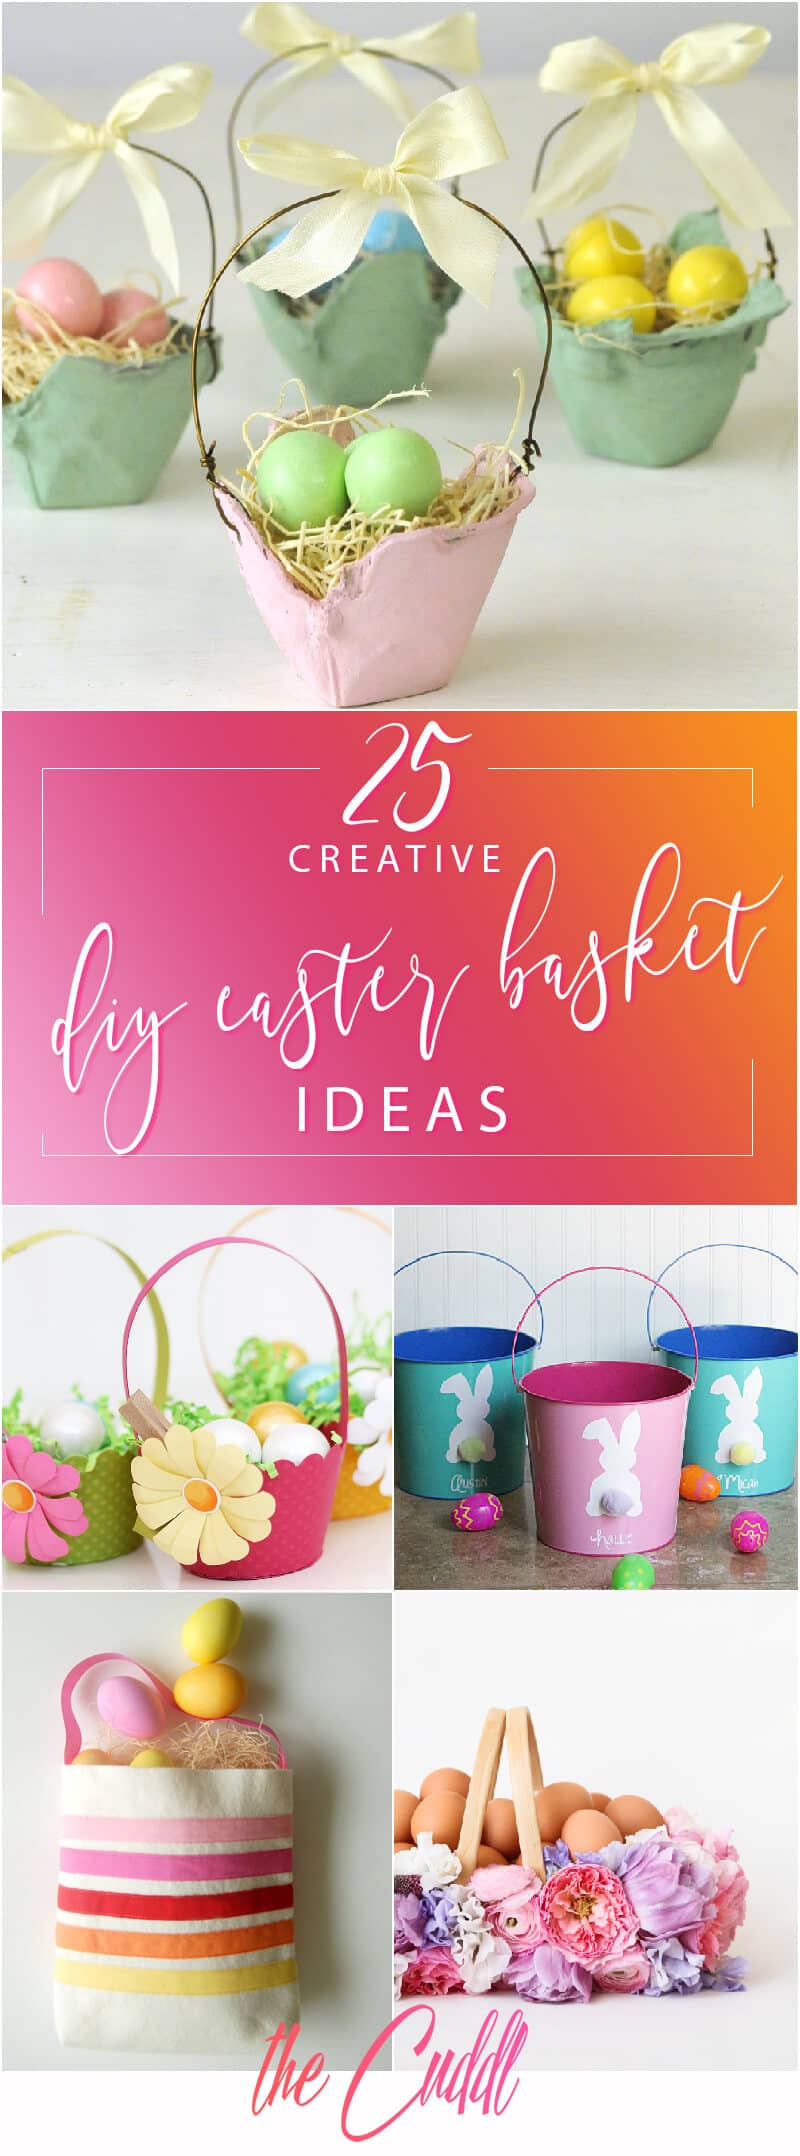 25 Creative DIY Easter Basket Ideas that Can Be Done in One Afternoon